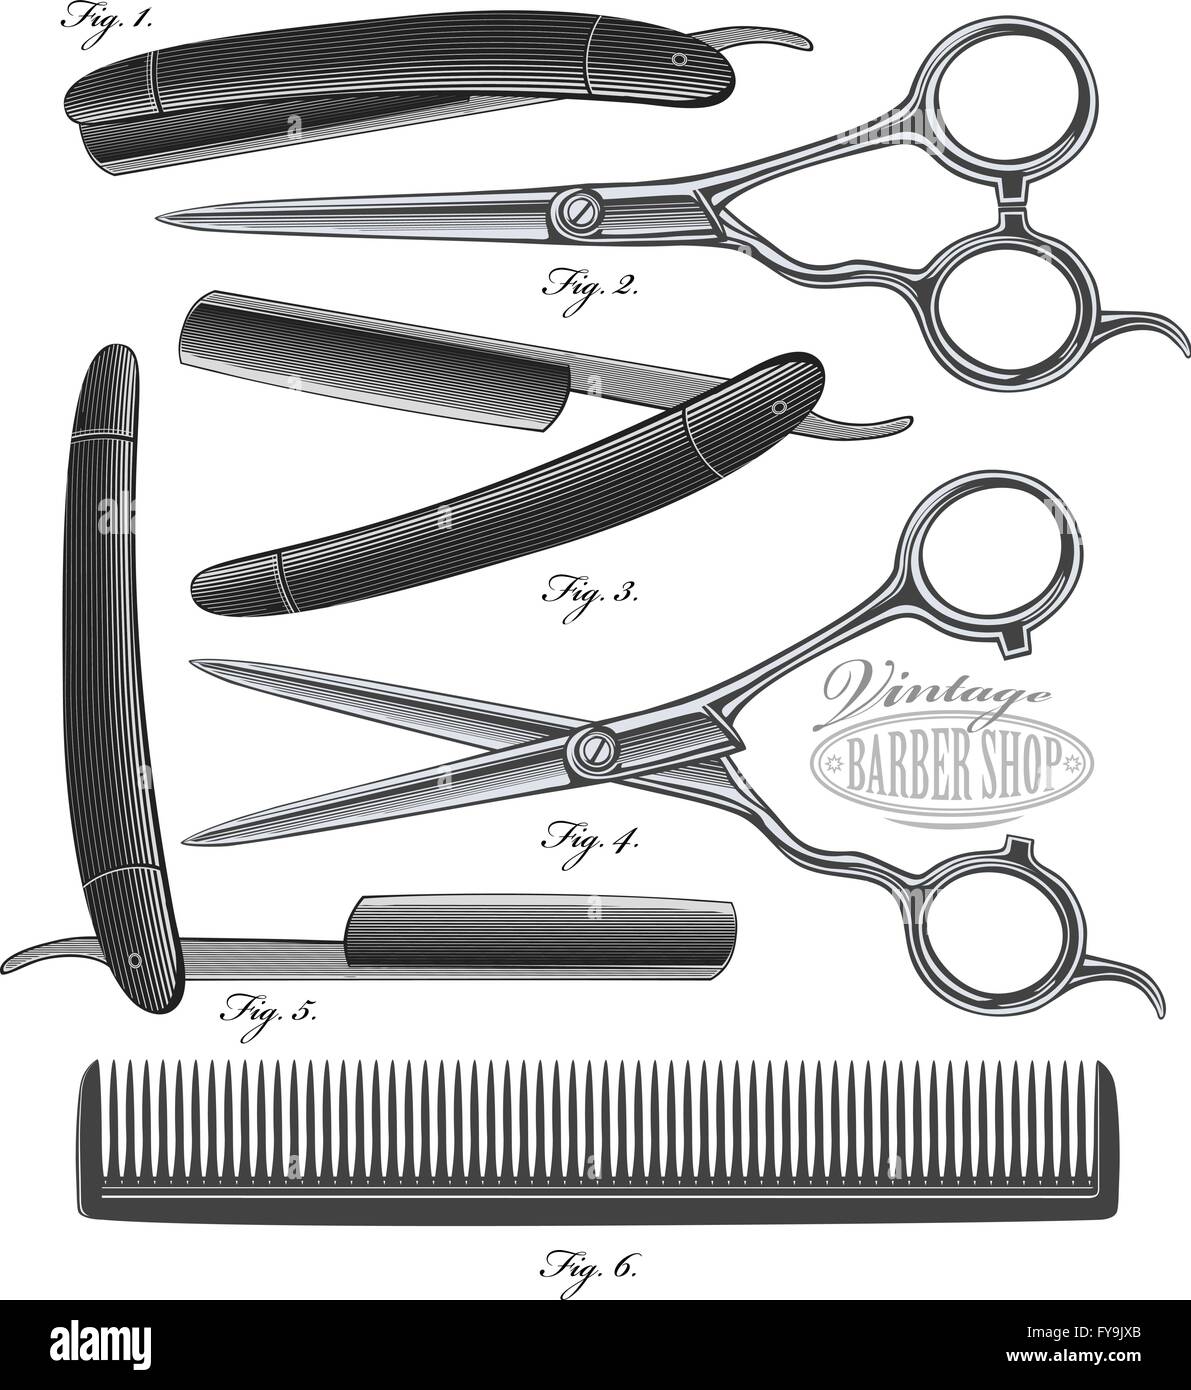 Comb, Scissors and Razor in vintage engraving style Stock Vector